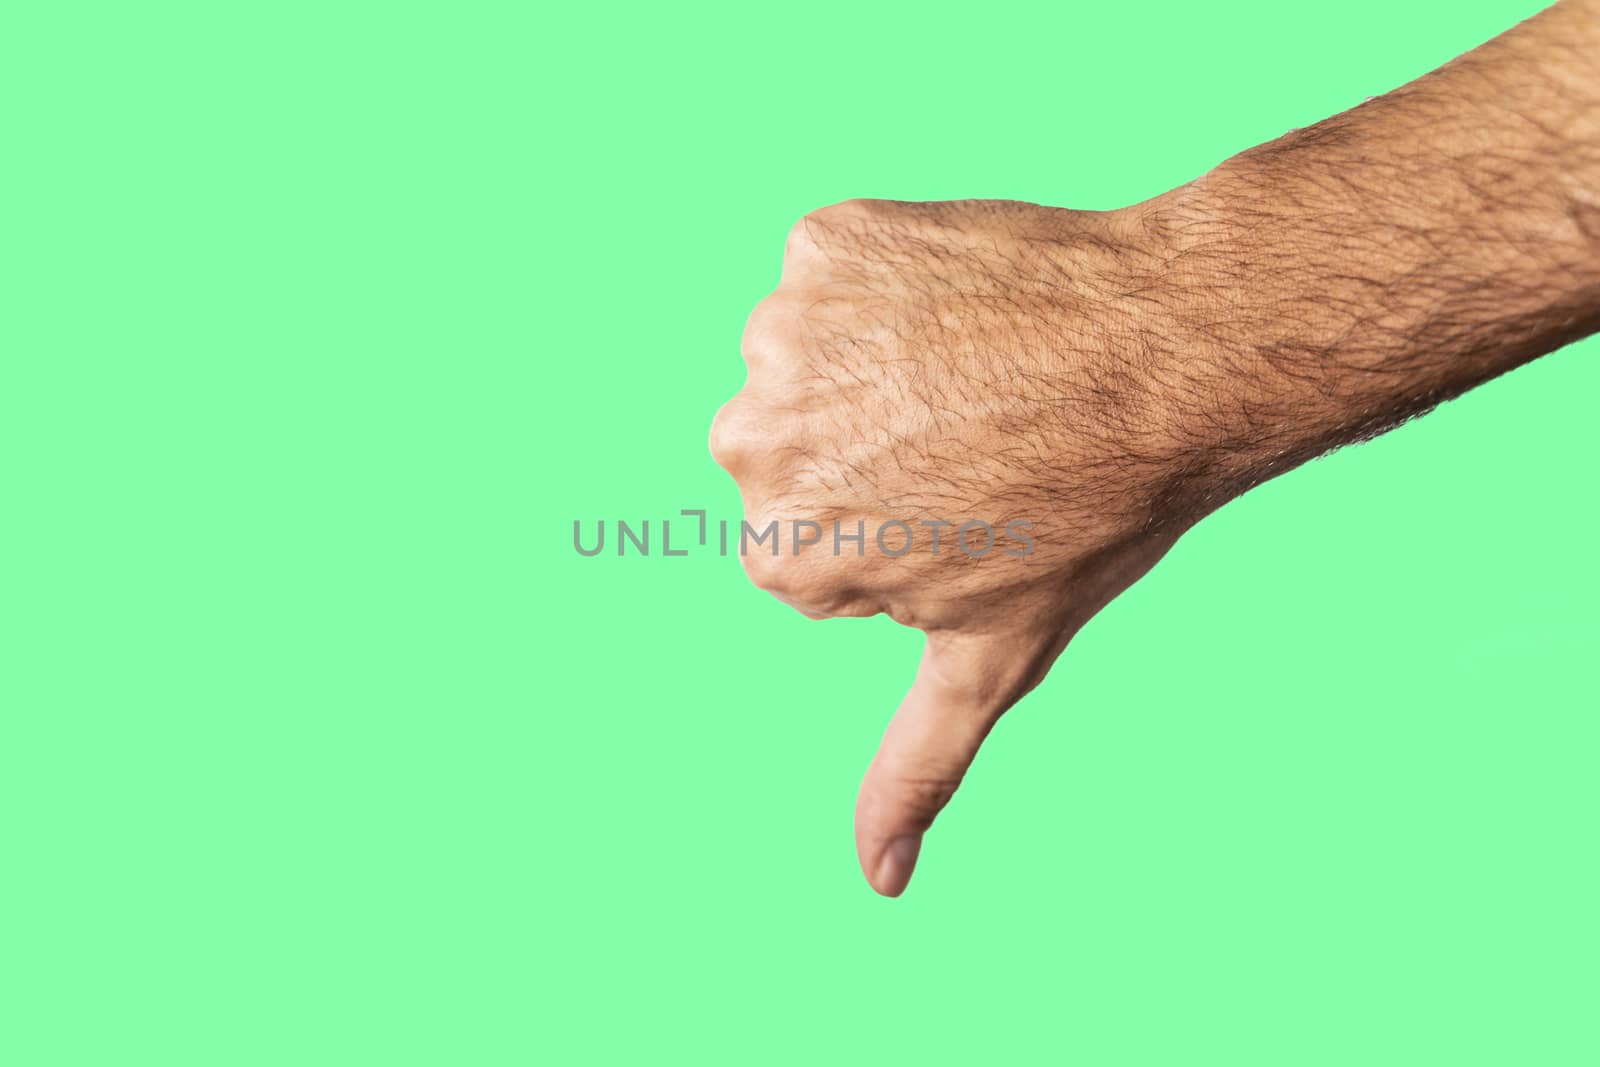 Thumb down hand sign isolated on a green background.